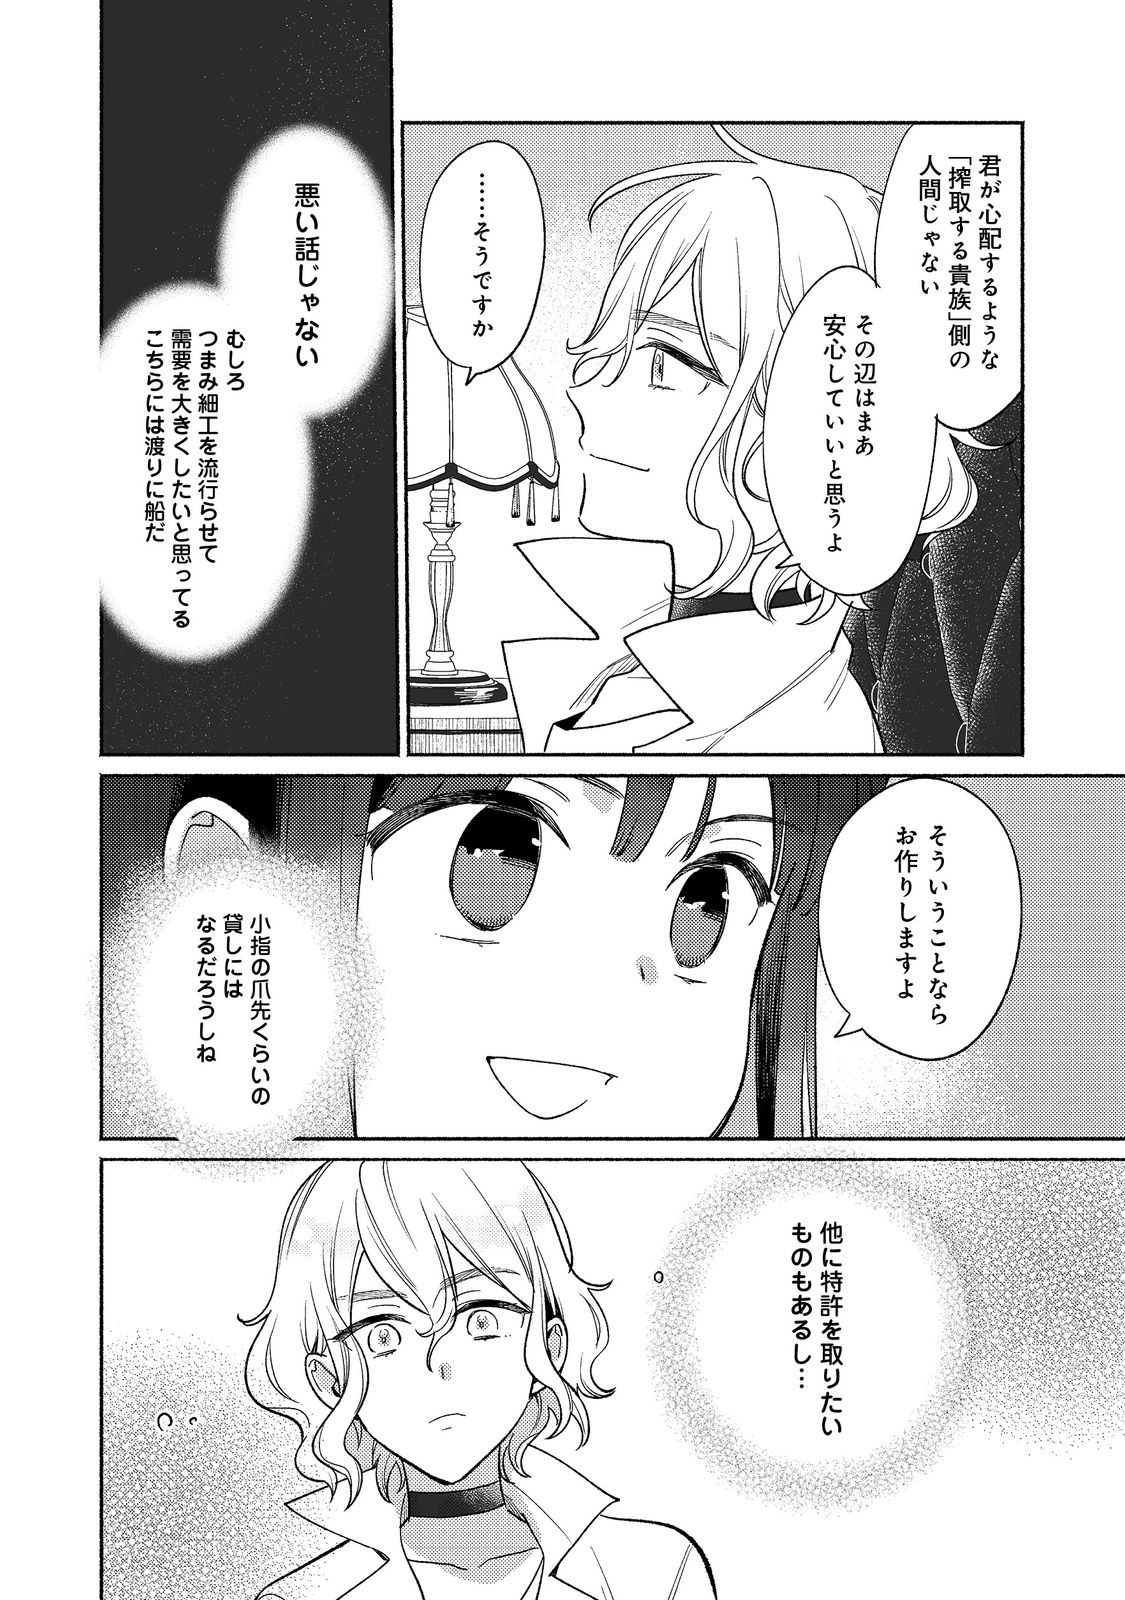 I’m the White Pig Nobleman 第19.2話 - Page 6